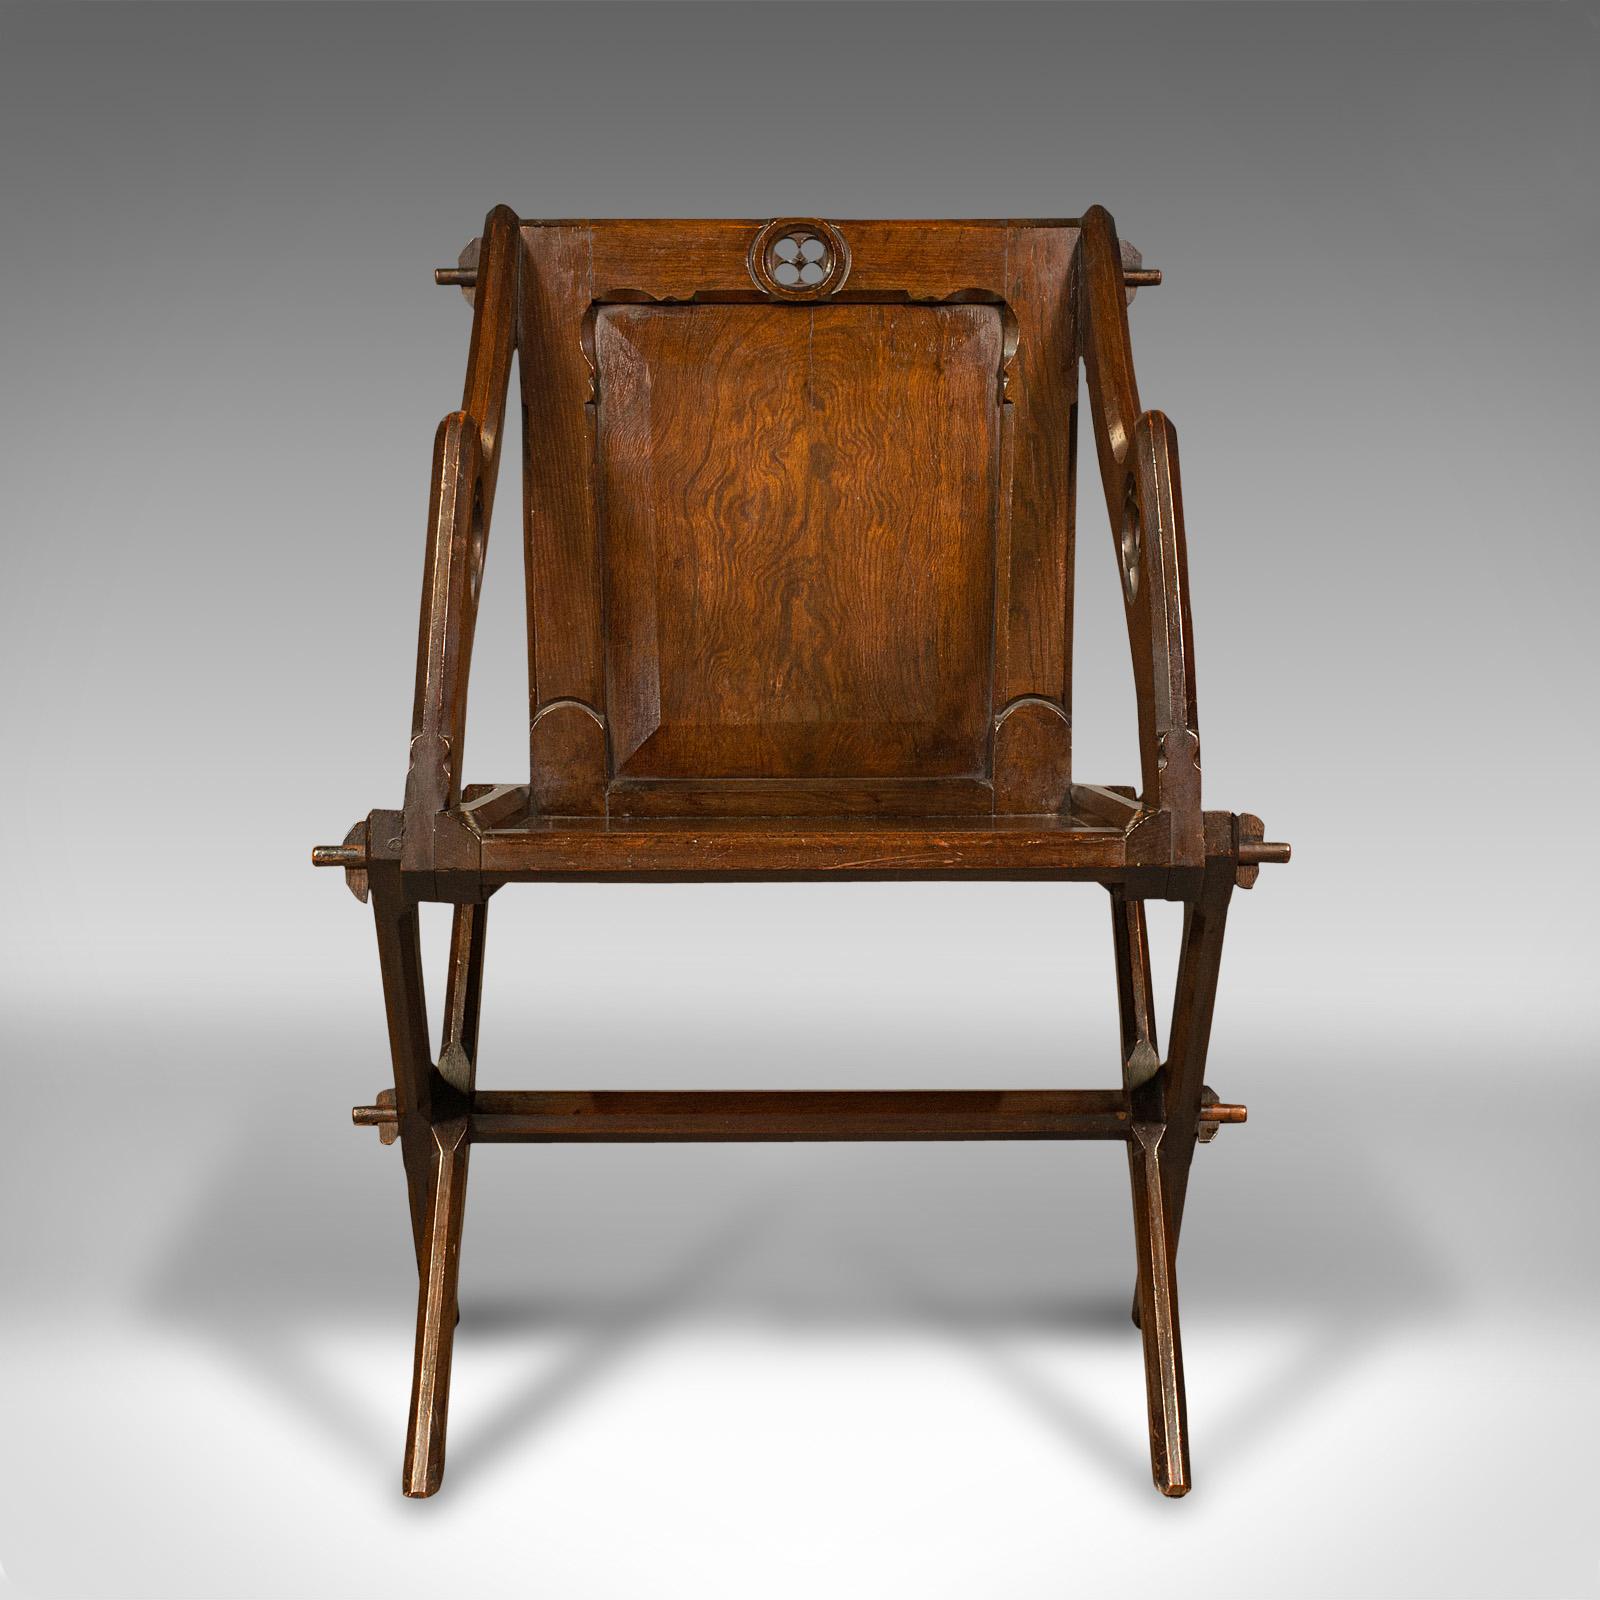 This is an antique Glastonbury chair. An English, pitch pine decorative armchair with Gothic overtones, dating to the Victorian period, circa 1880.

Delightful example of the fabled Glastonbury chair, with superb form and detail
Displaying a